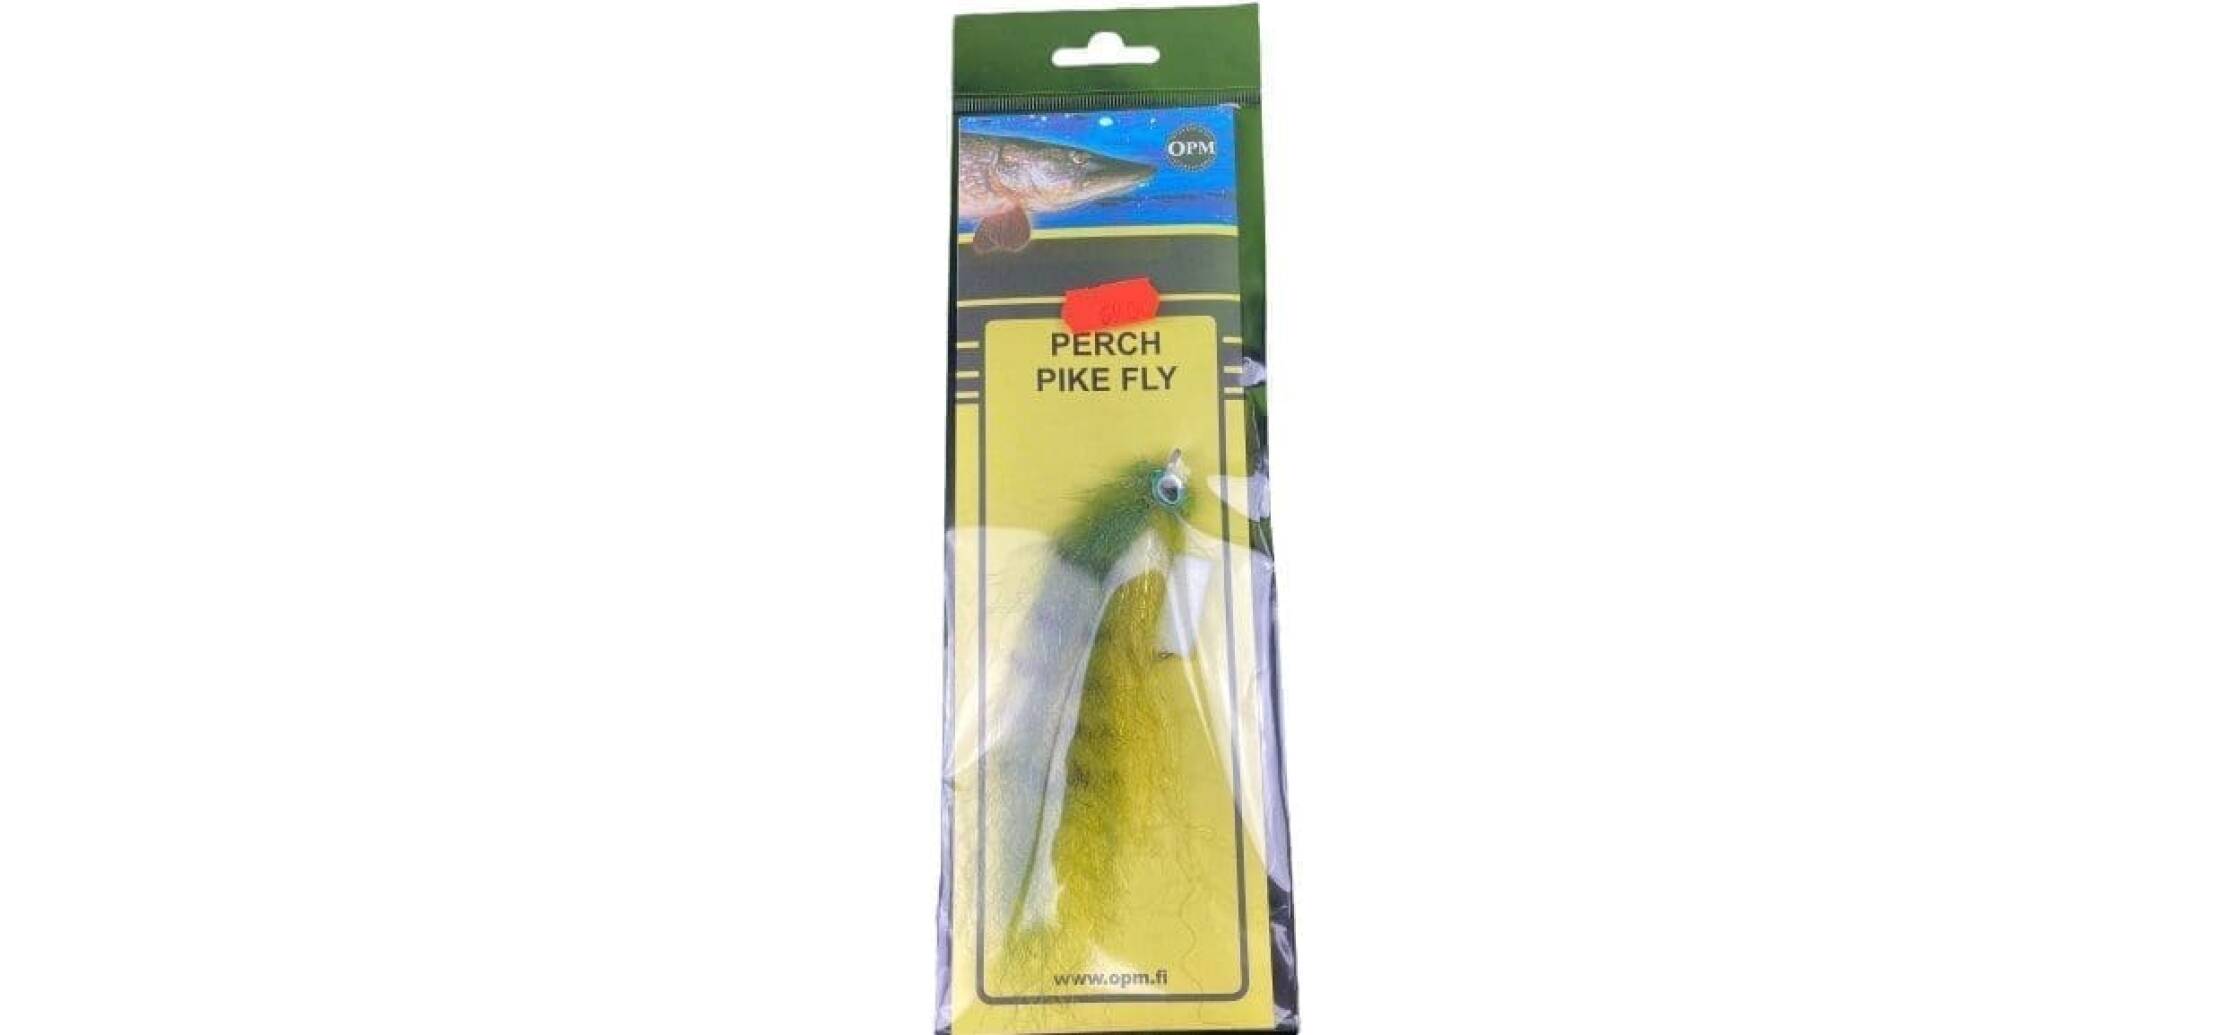 Perch pike fly